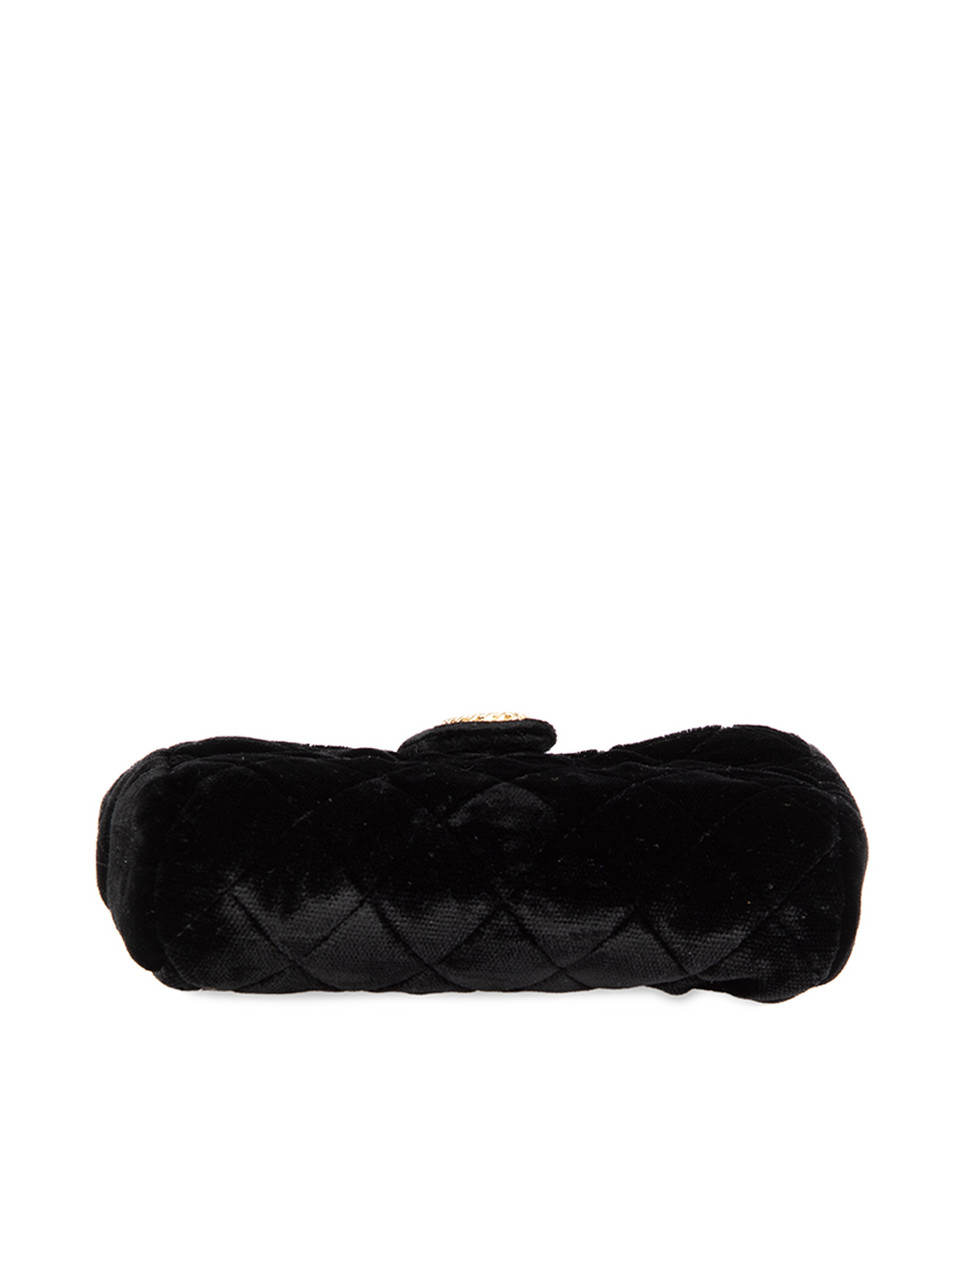 Chanel Black Velvet Quilted Coin Purse